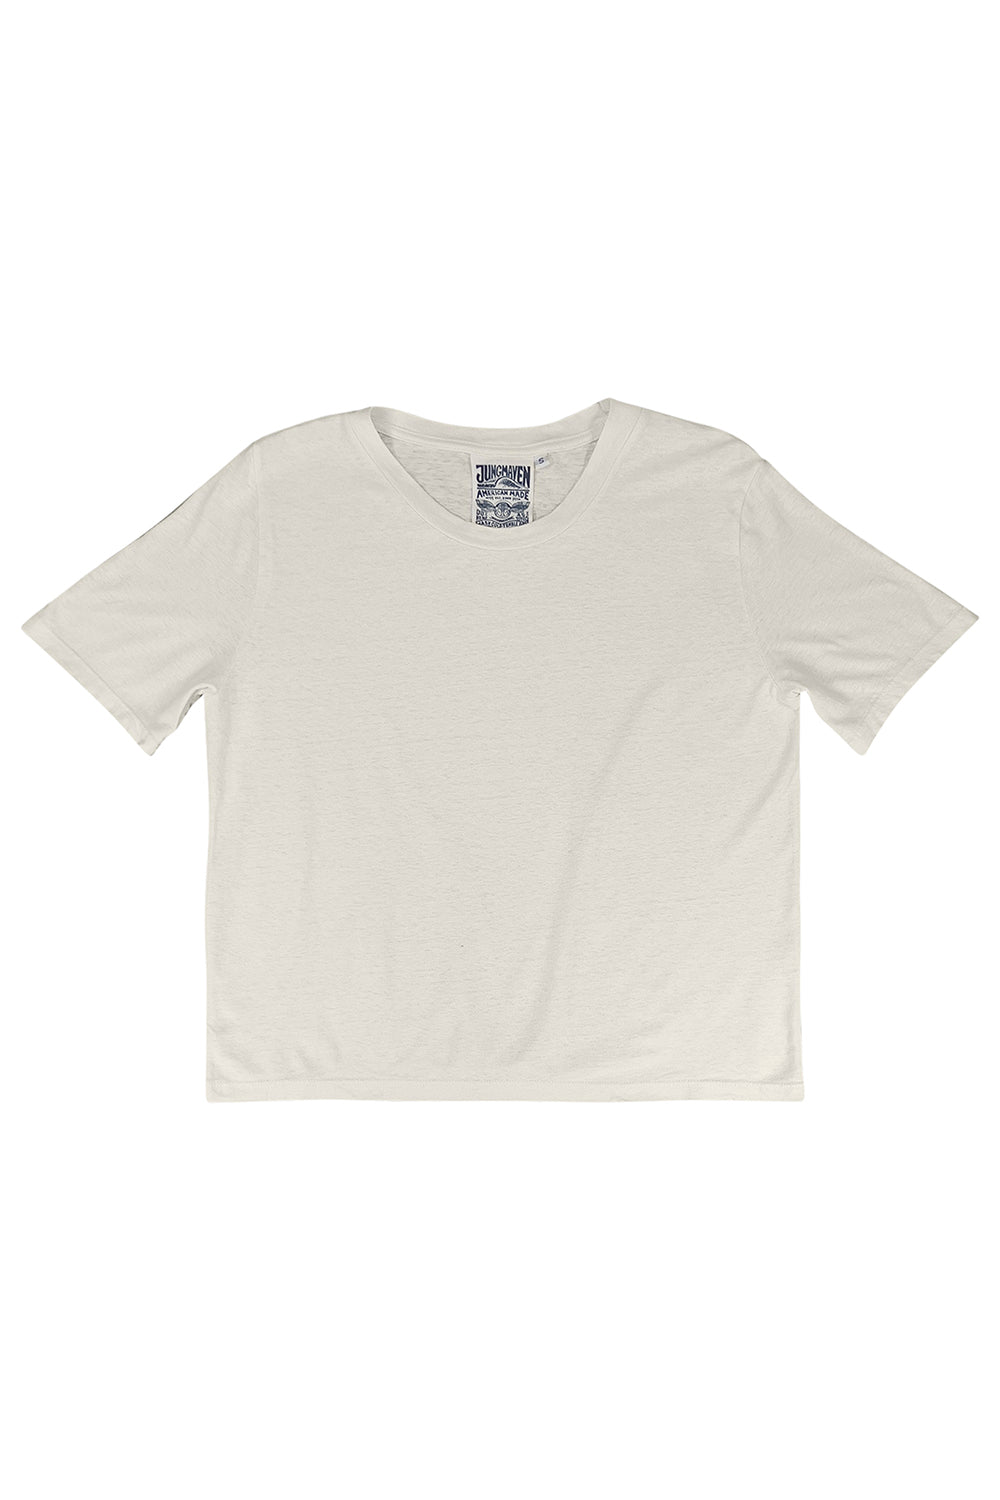 Silverlake Cropped Tee | Jungmaven Hemp Clothing & Accessories / Color: Washed White